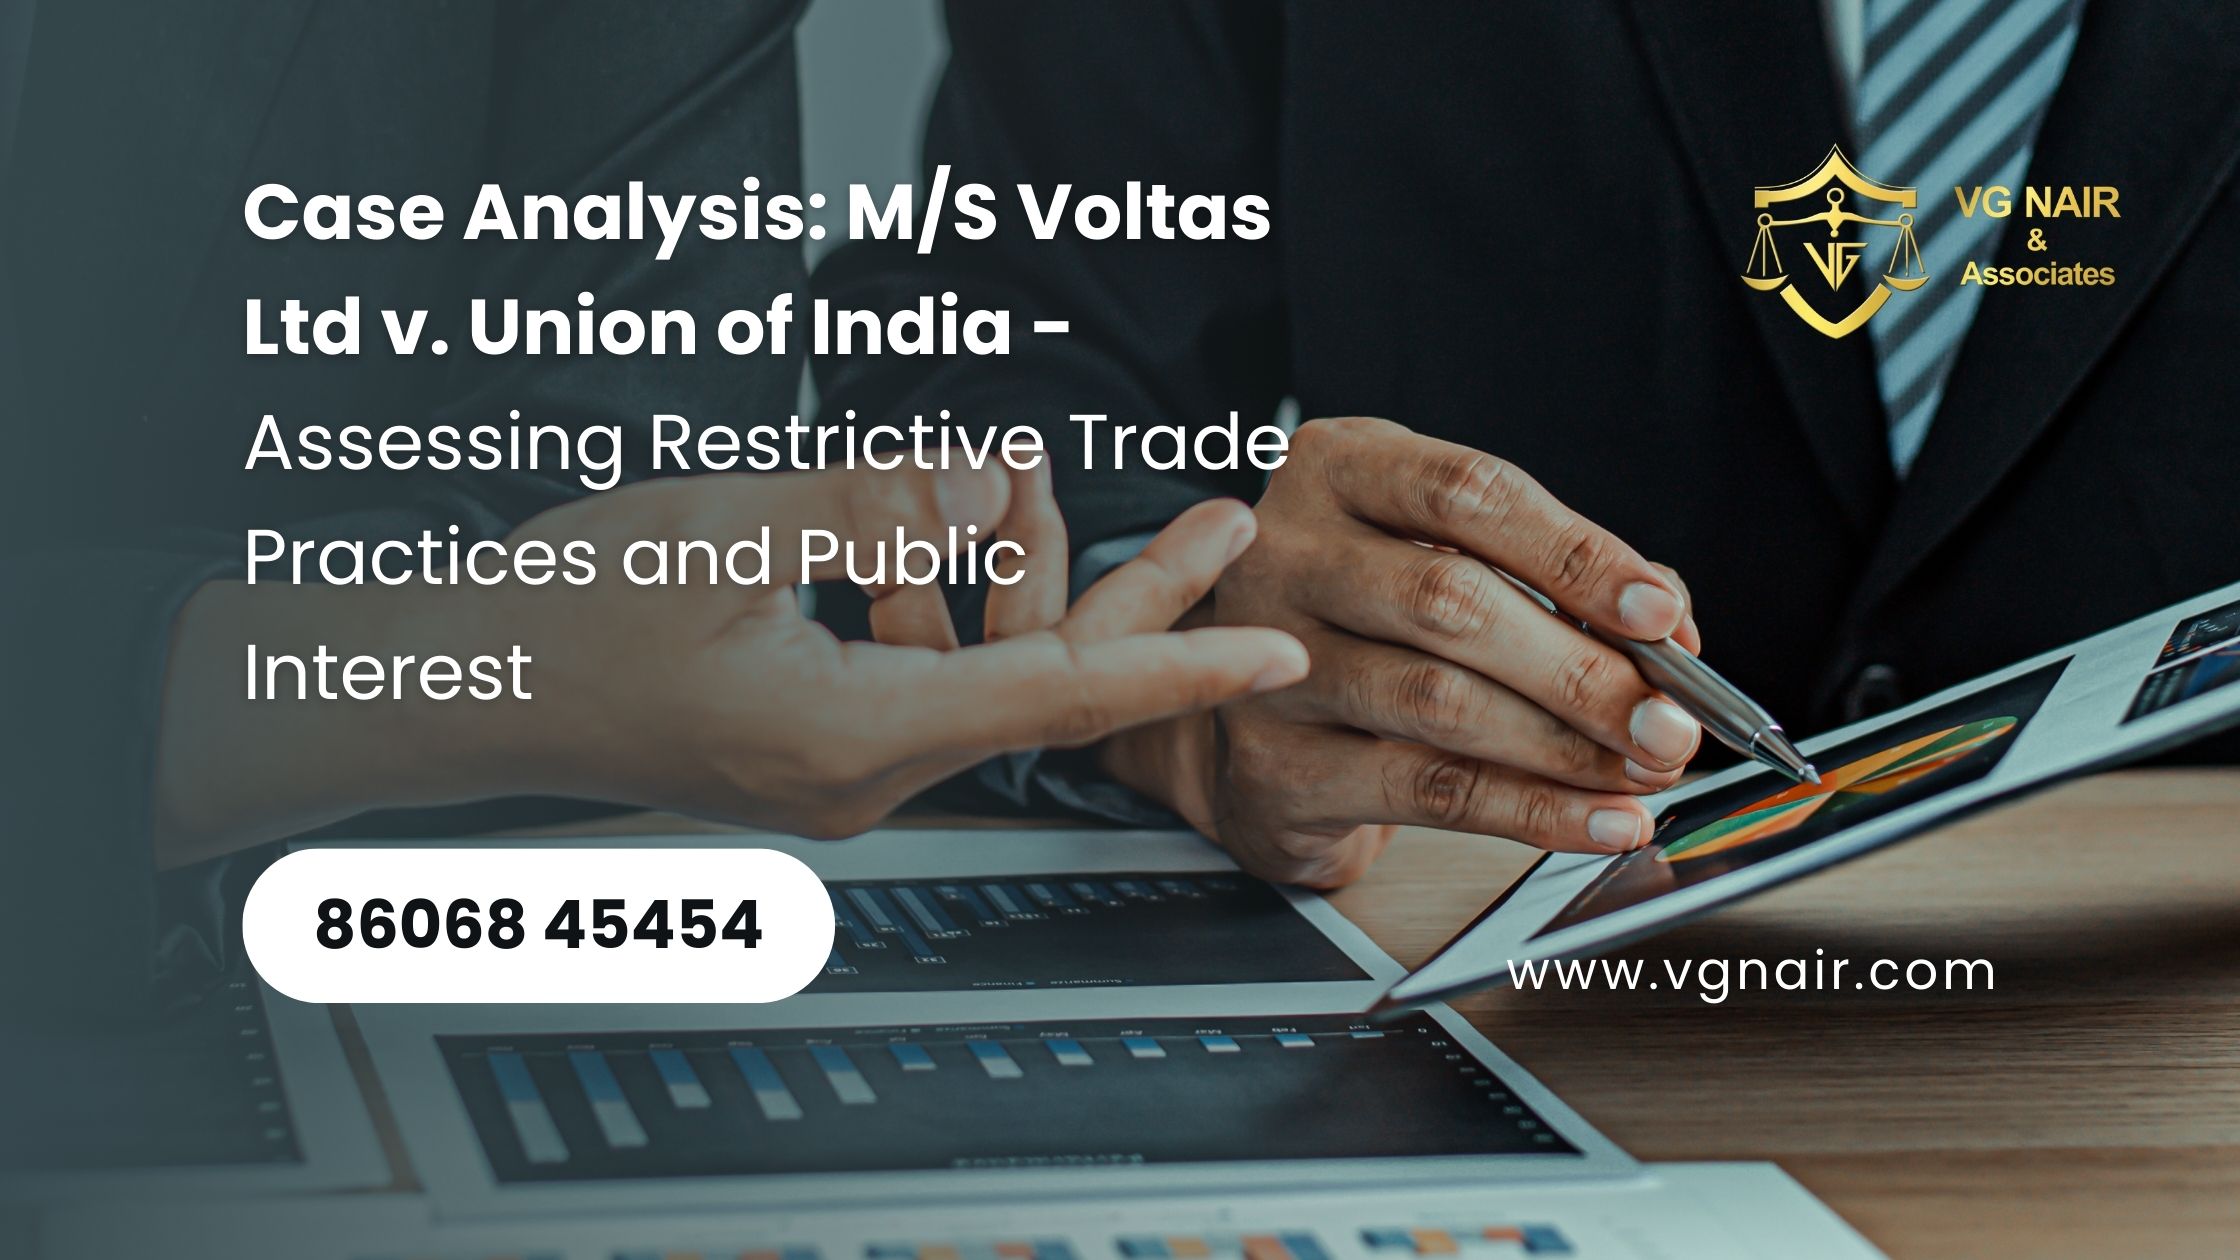 Case Analysis MS Voltas Ltd vs. Union of India  Assessing Restrictive Trade Practices and Public Interest